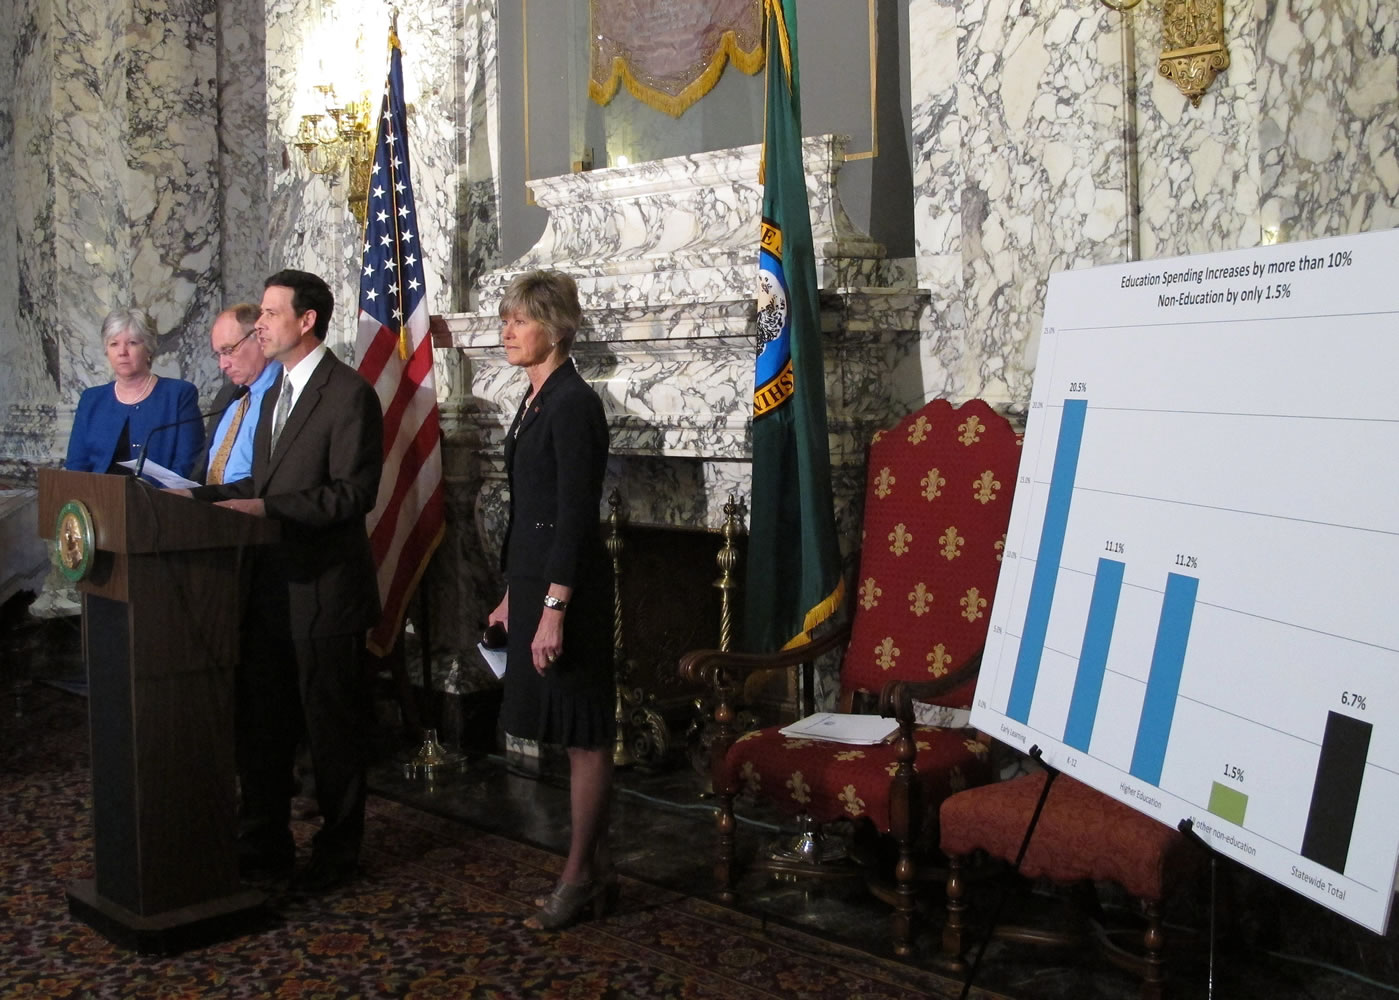 Sen. Andy Hill, R-Redmond, second from right, speaks about the chamber's budget proposal, joined by Sens. Sharon Nelson, D-Maury Island, and Jim Hargrove, D-Hoquiam, left, and Sen.